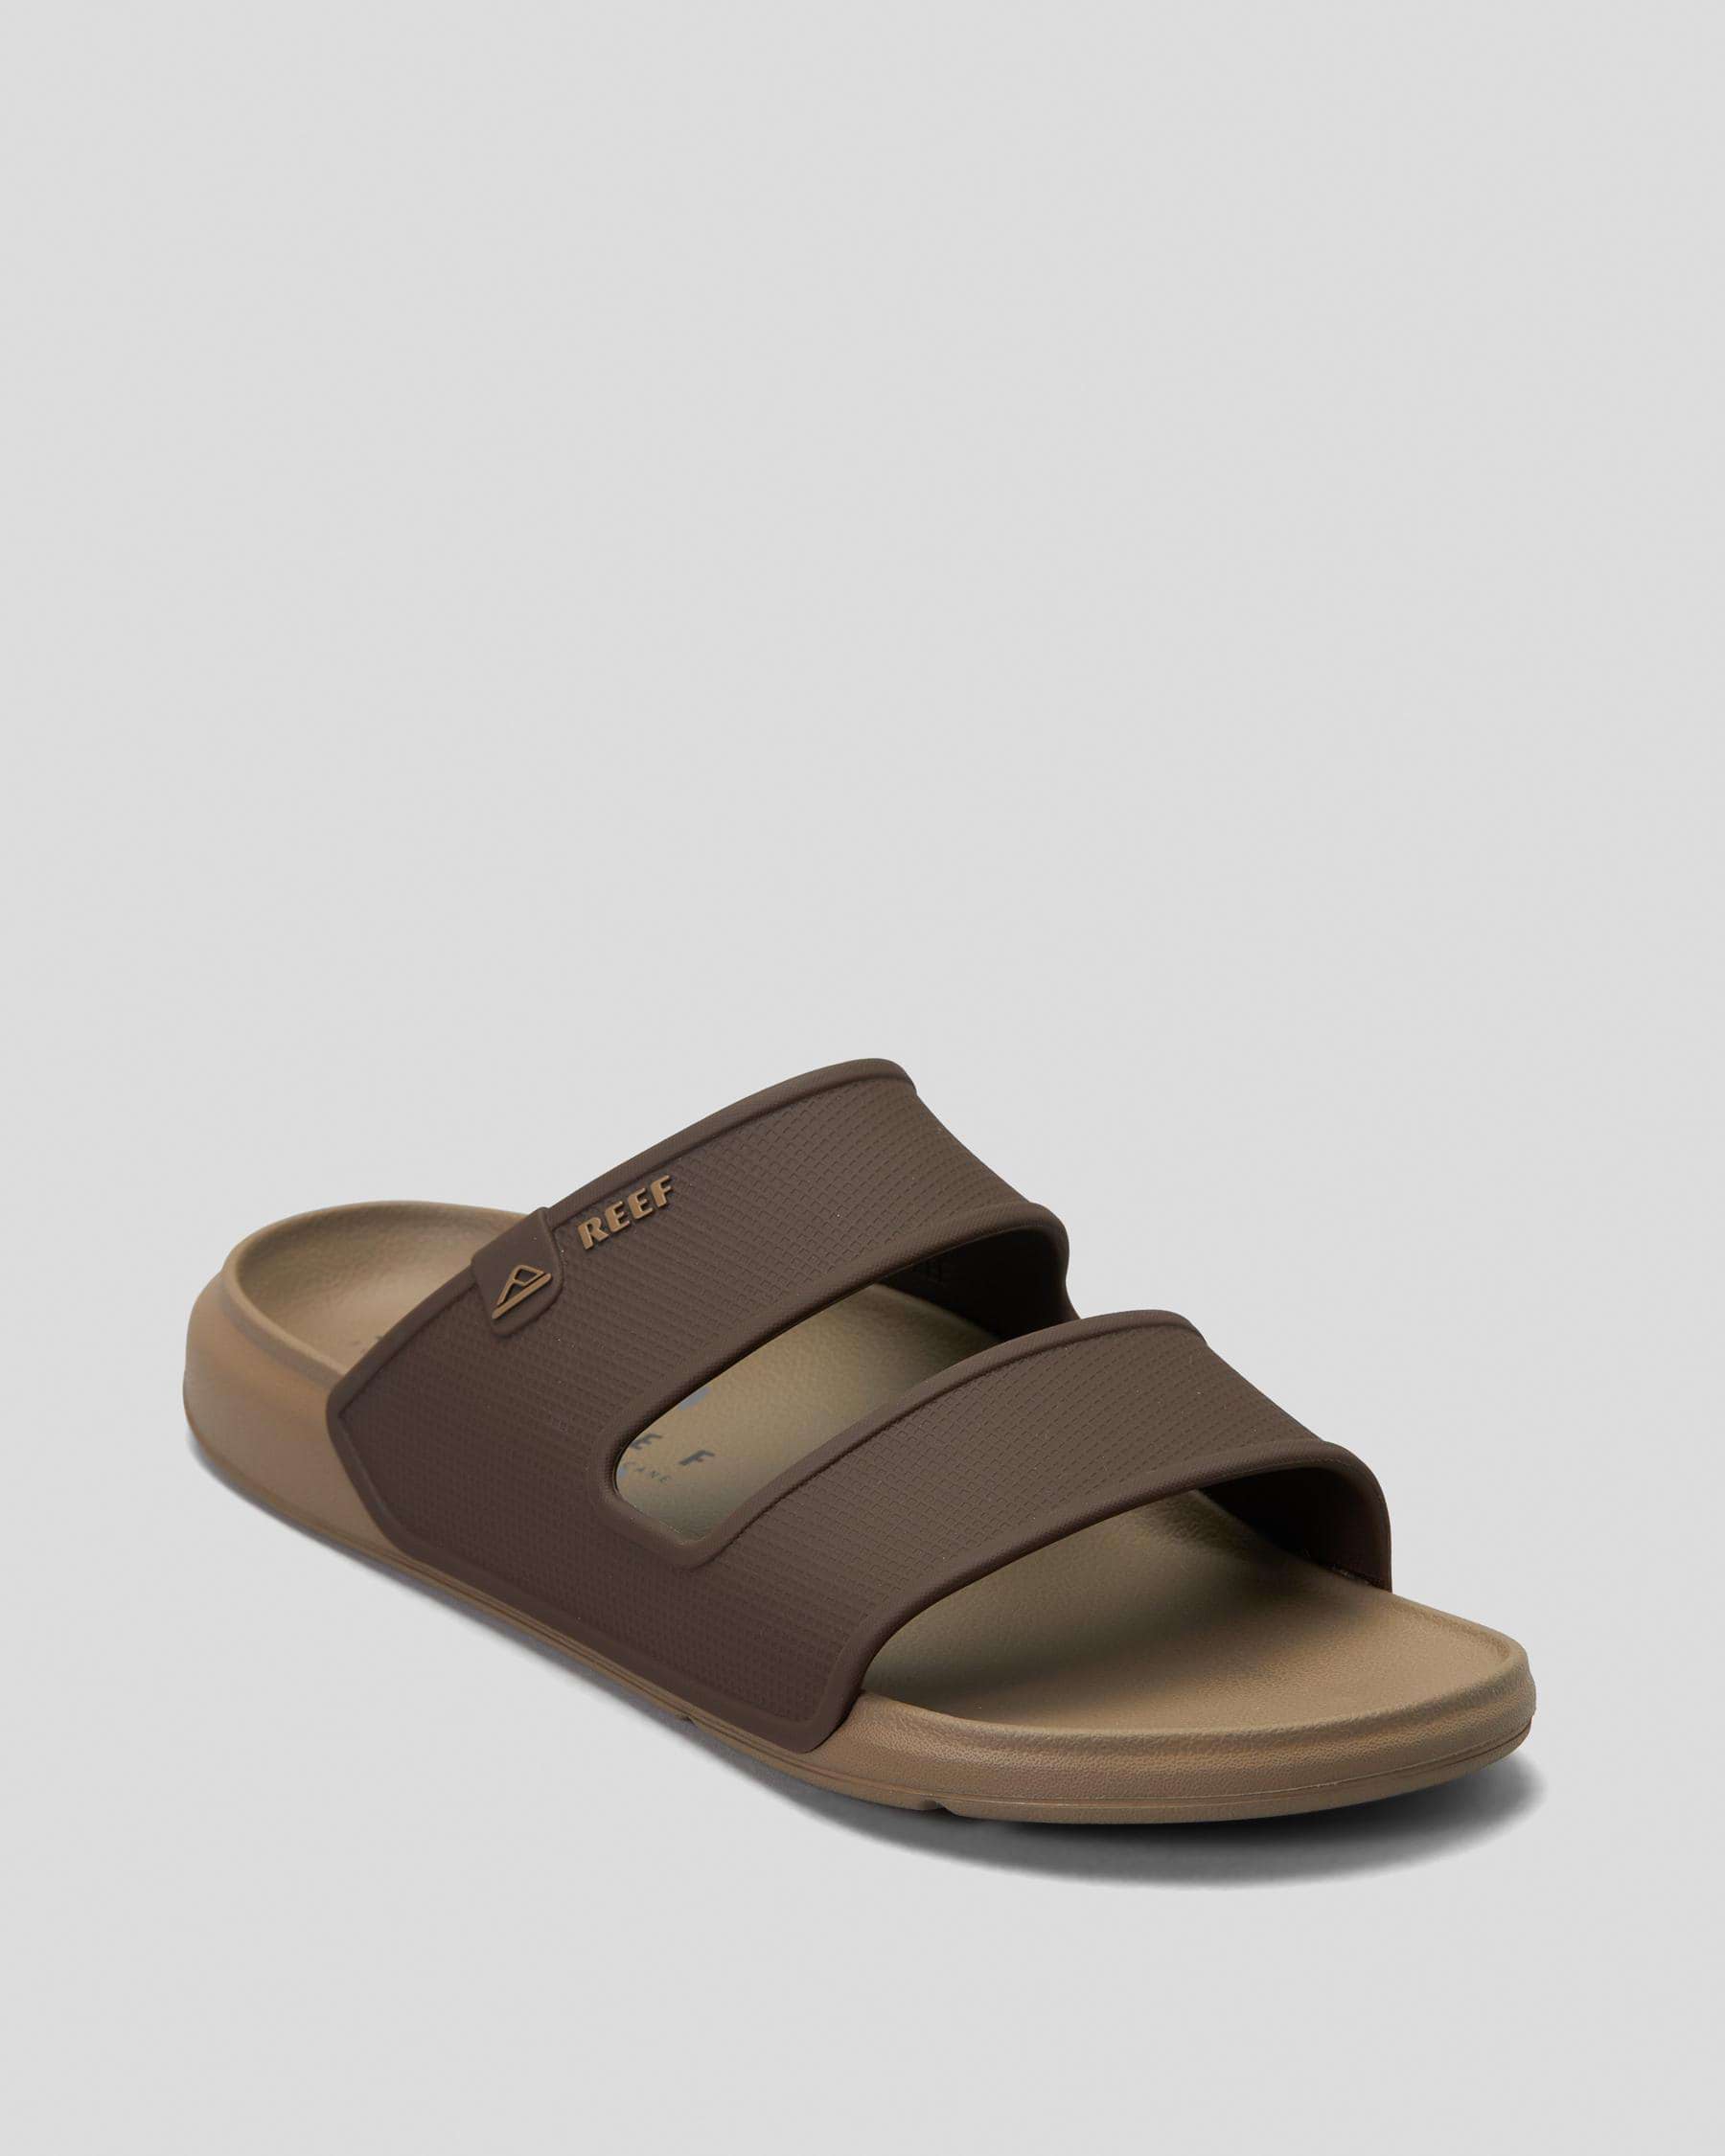 Reef Oasis Double Up Sandals In Brown/tan - Fast Shipping & Easy ...